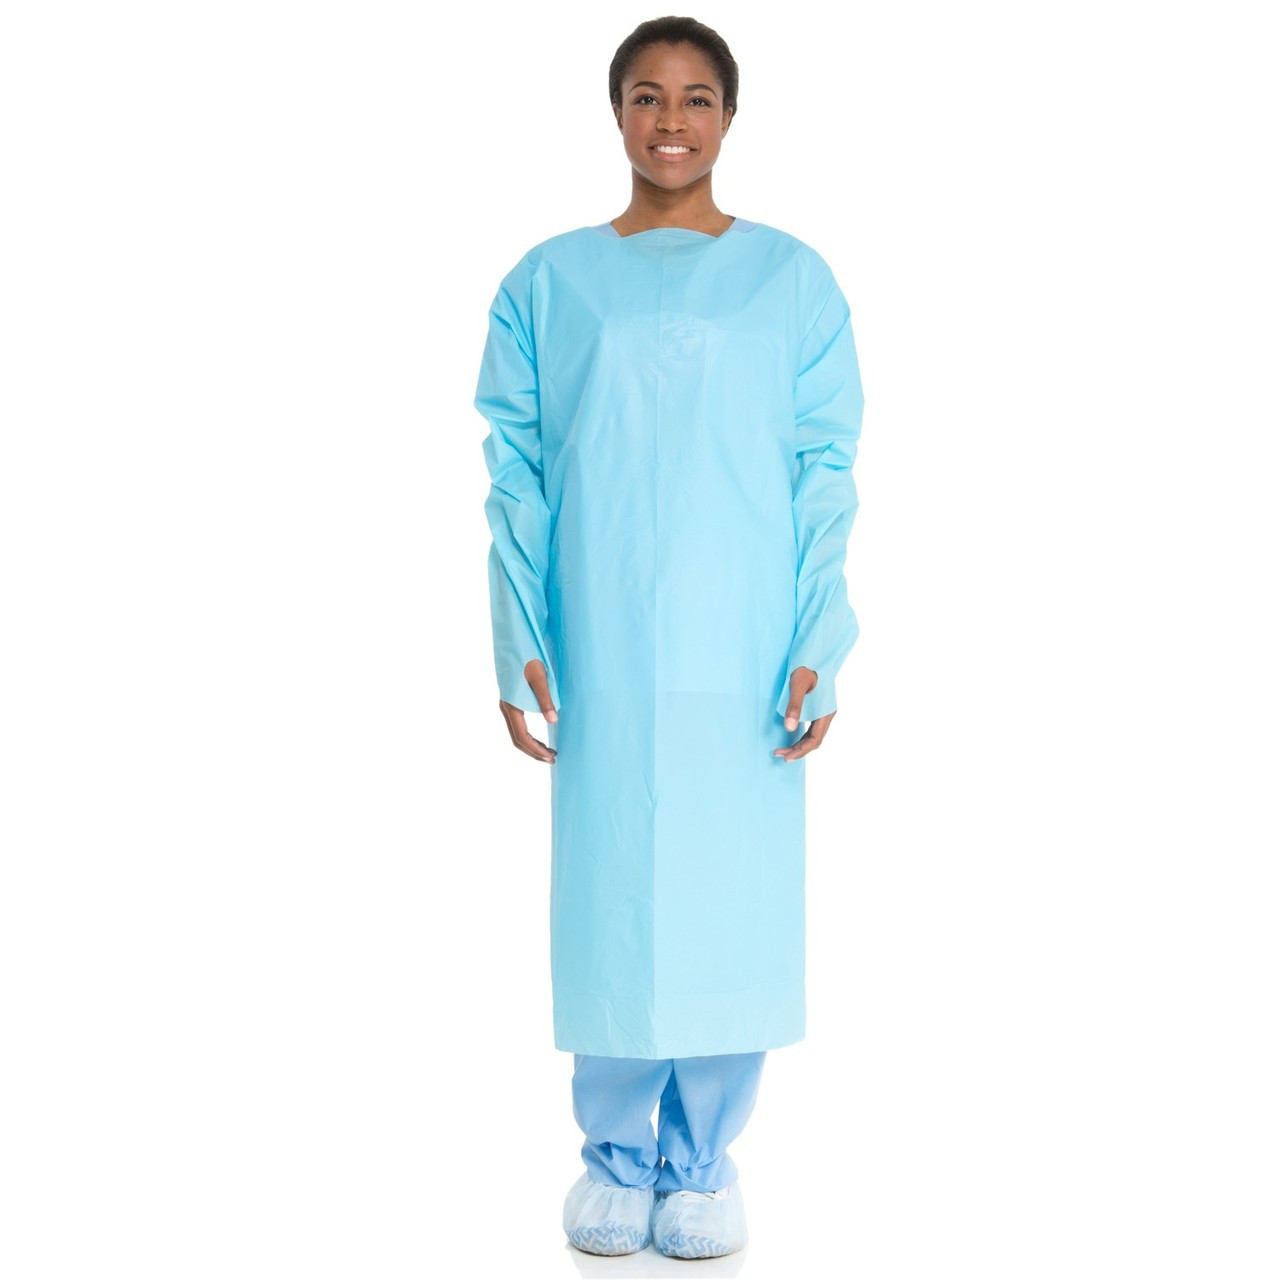 Patient IV Gowns Cypress Compass Print by American Dawn